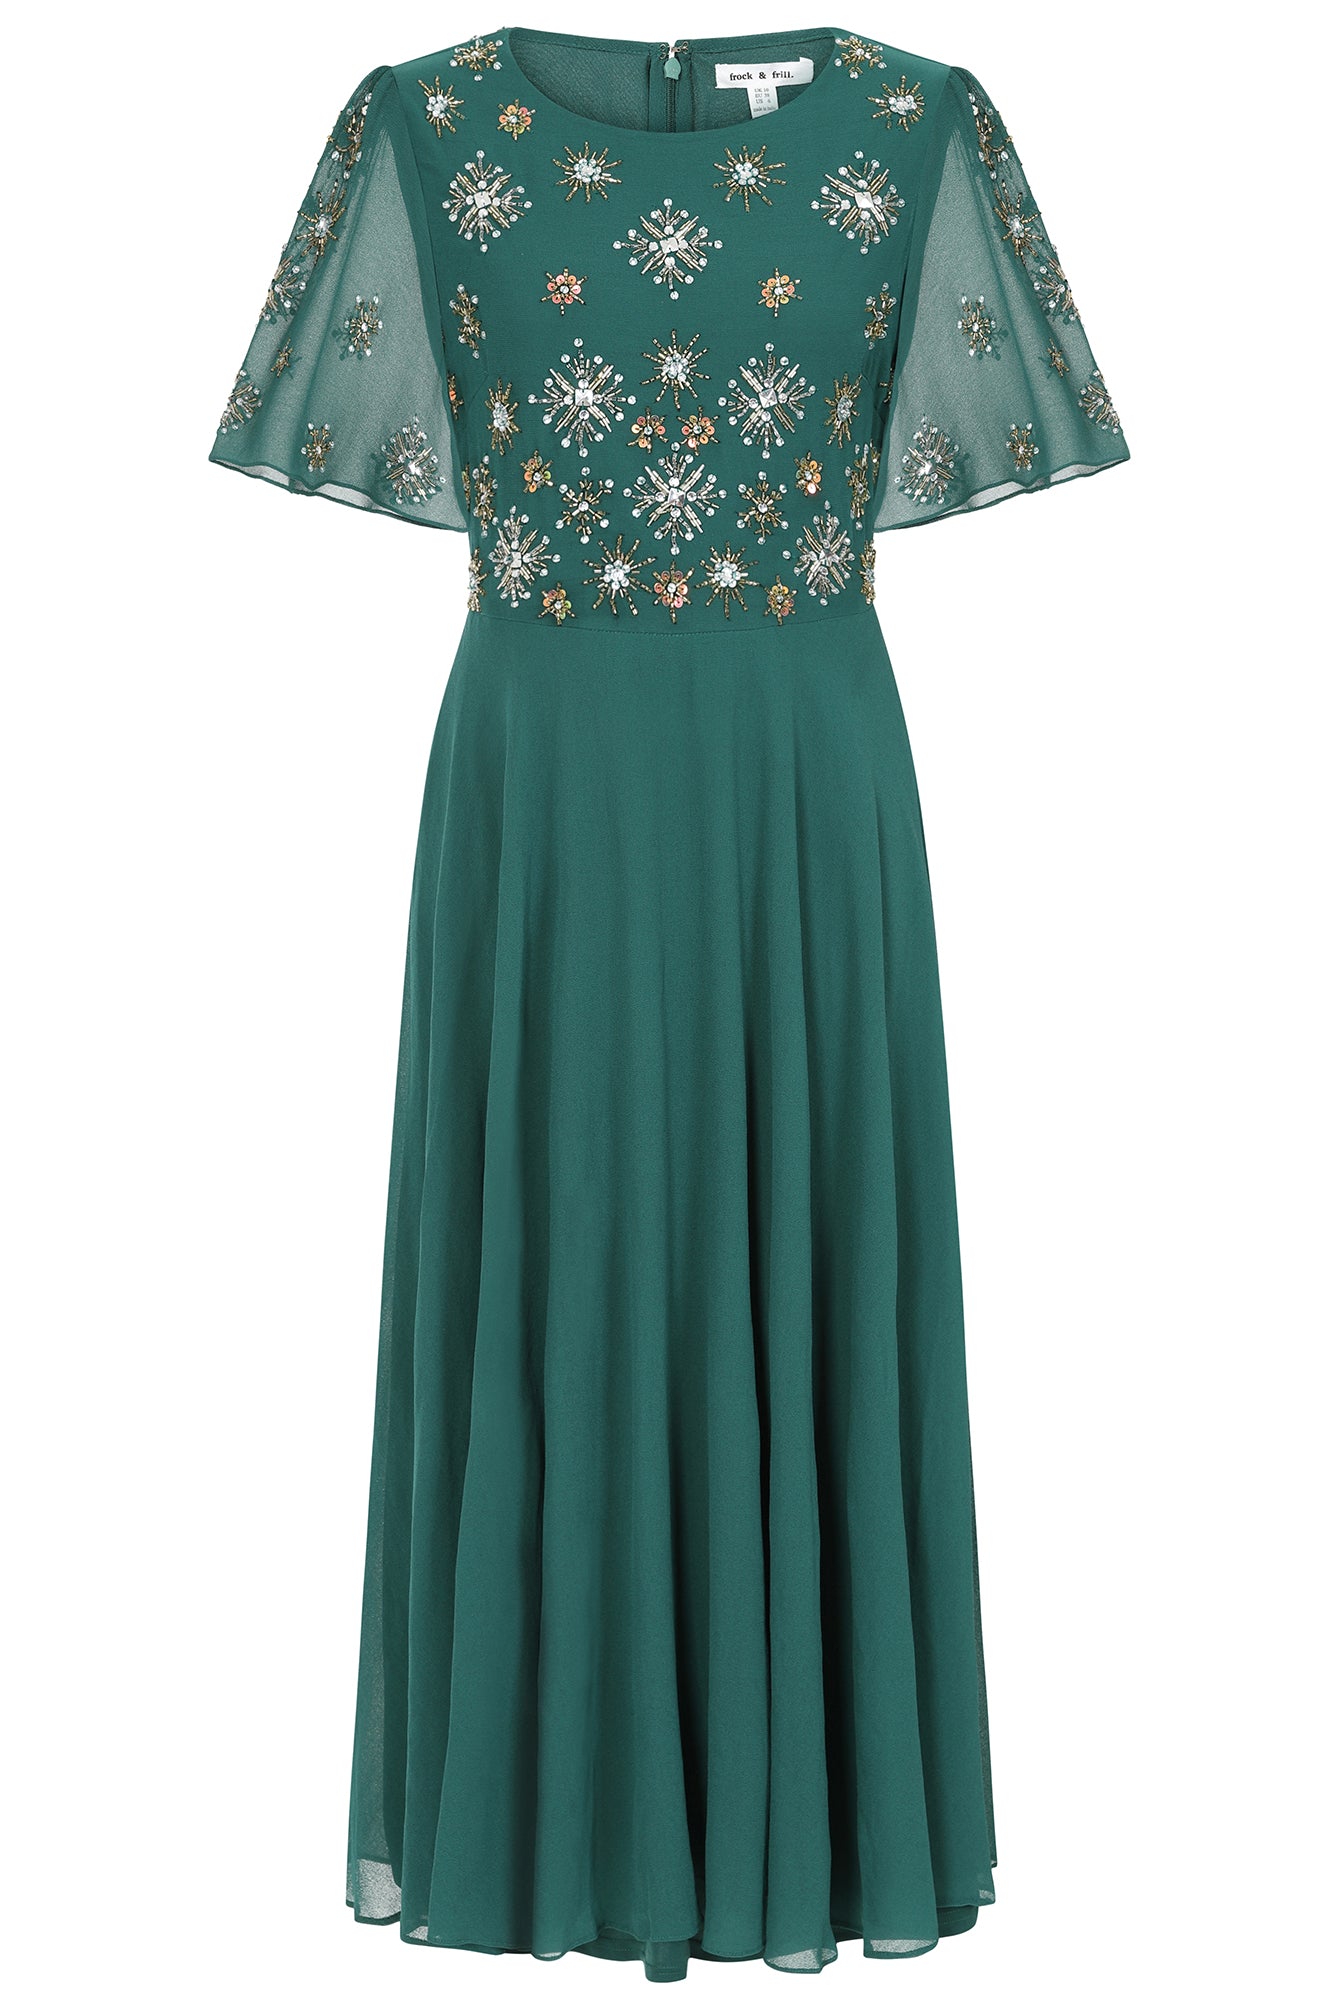 Women’s Kelby Embellished Midaxi Dress - Alpine Green Medium Frock and Frill